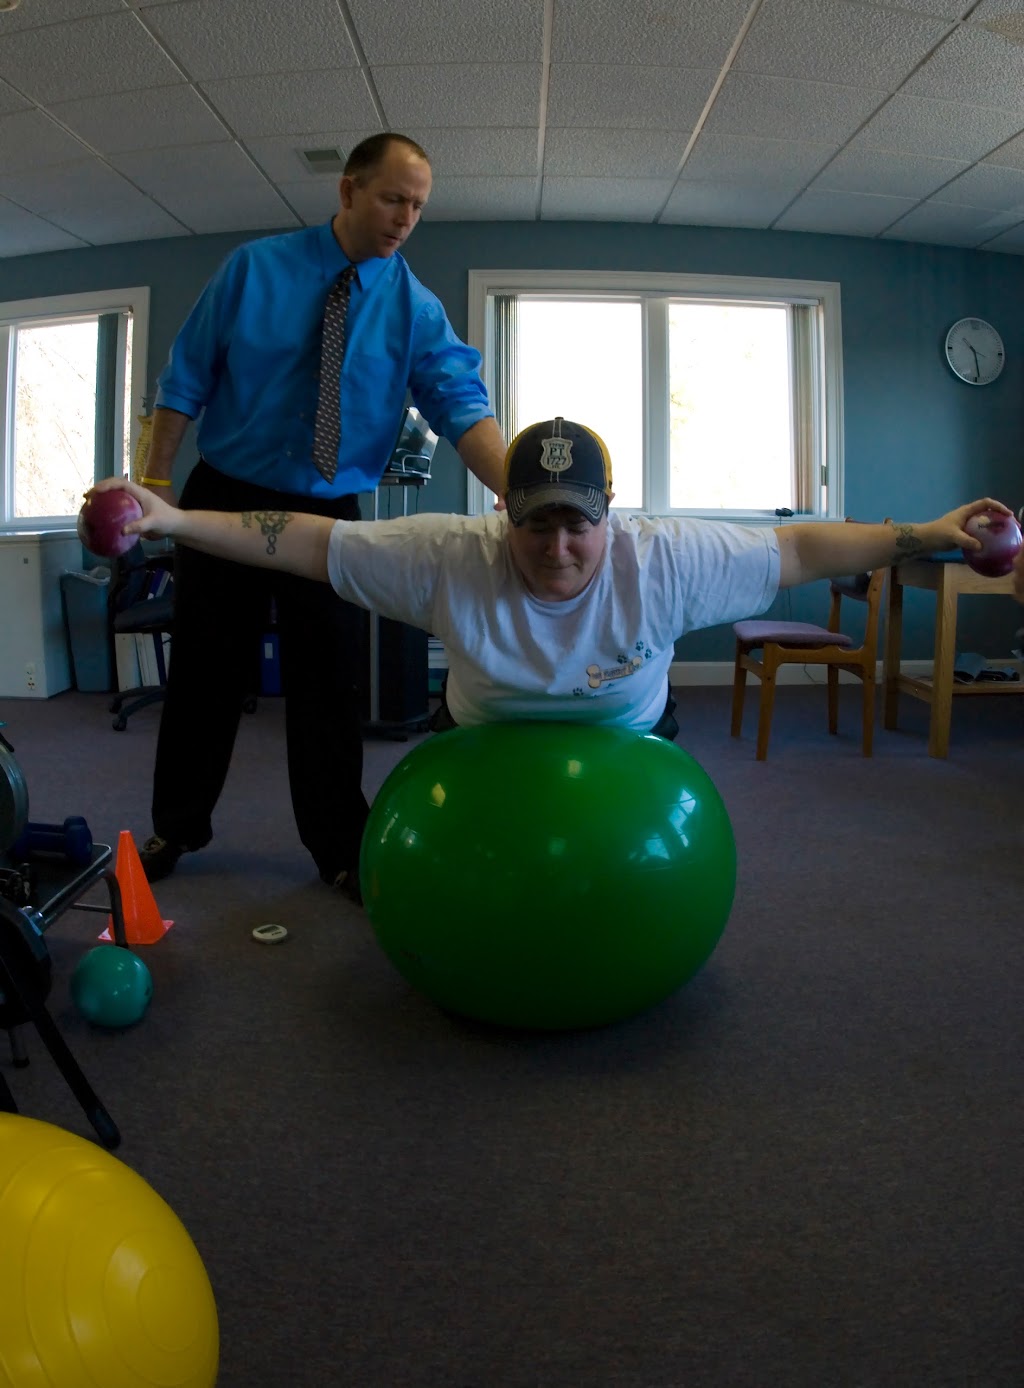 Peak Physical Therapy | 550 Chase Ave, Waterbury, CT 06704 | Phone: (203) 757-0100